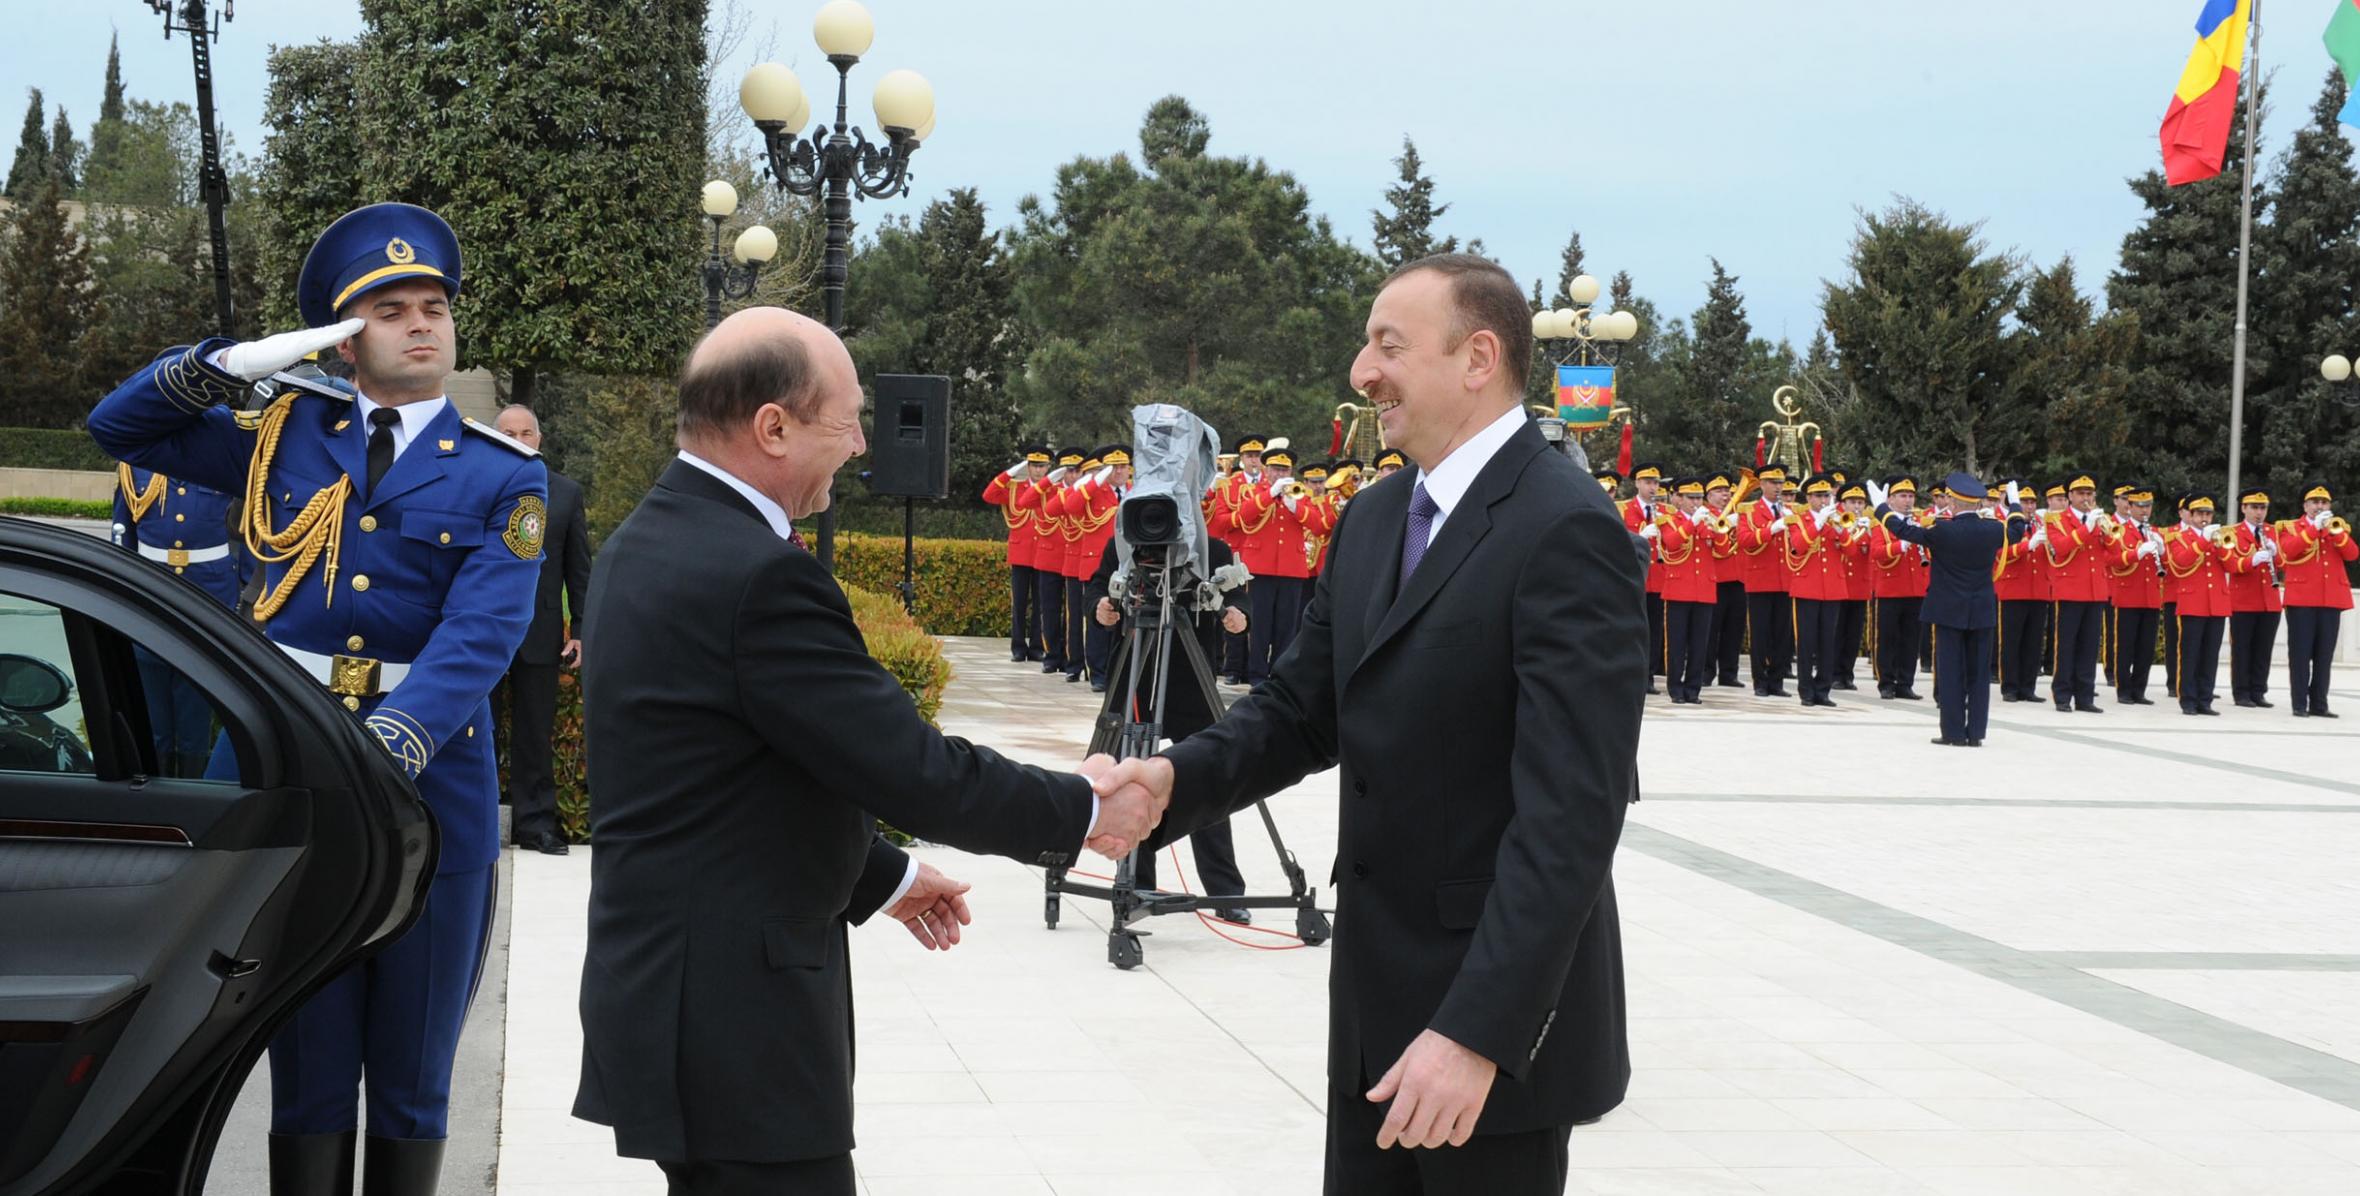 An official welcoming ceremony was held for President of Romania, Traian Băsescu